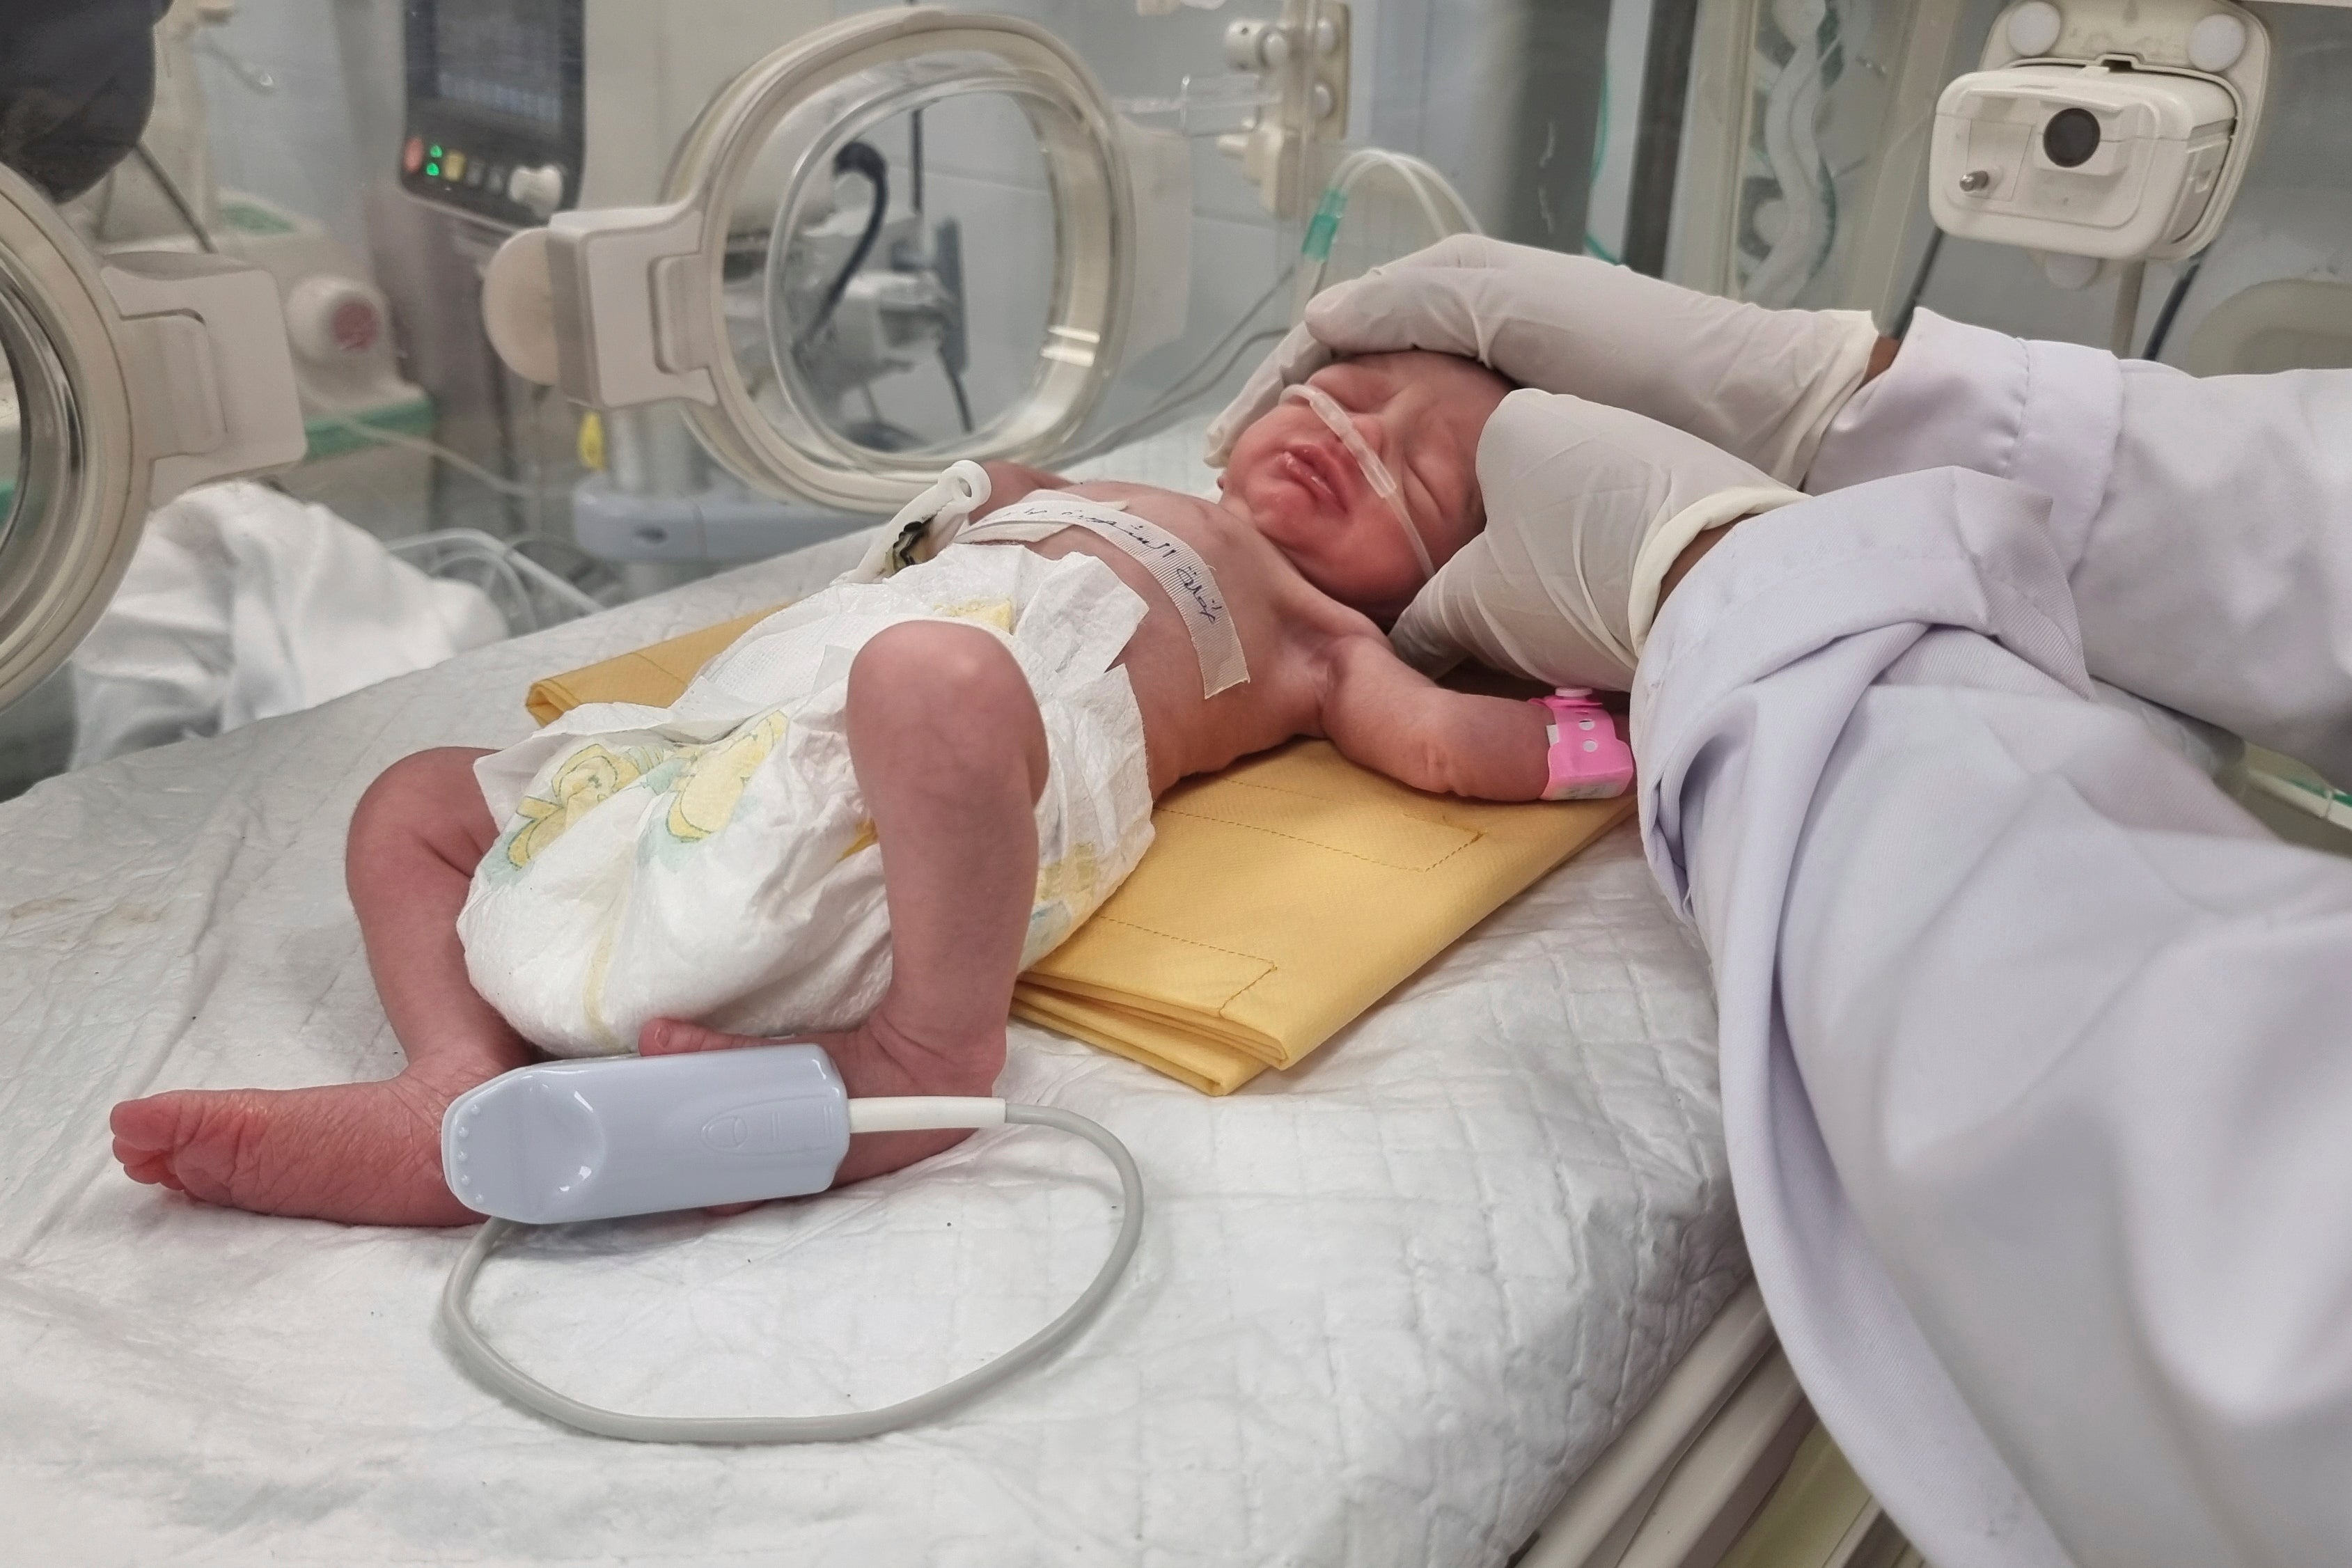 Sabreen al-Sakani was delivered by emergency caesarean section after her mother was fatally injured in a bombing on her home in Rafah